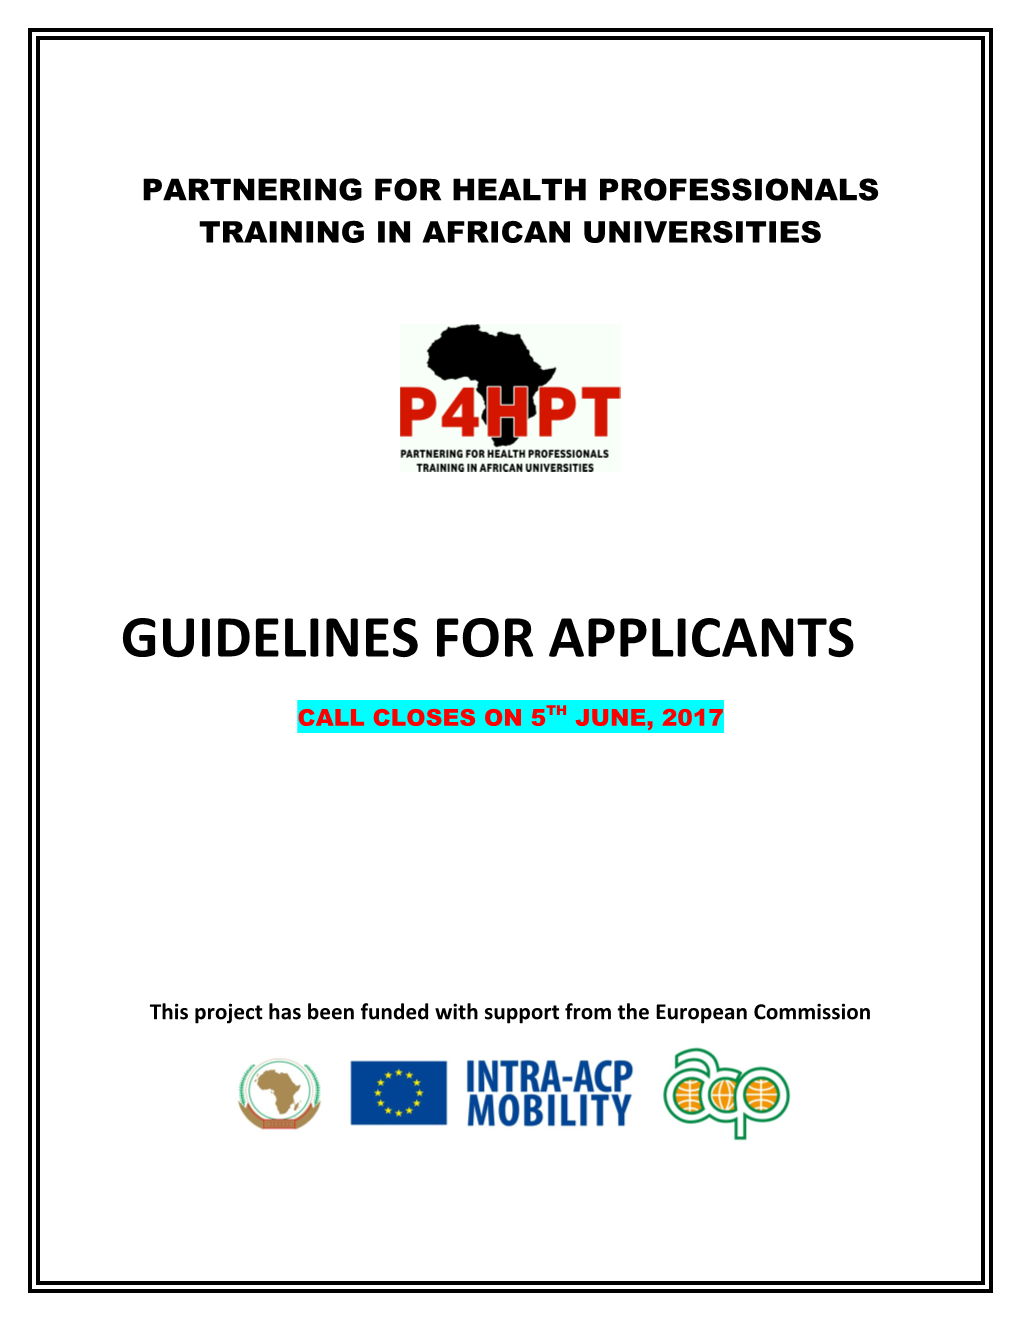 Partnering for Health Professionals Training in African Universities